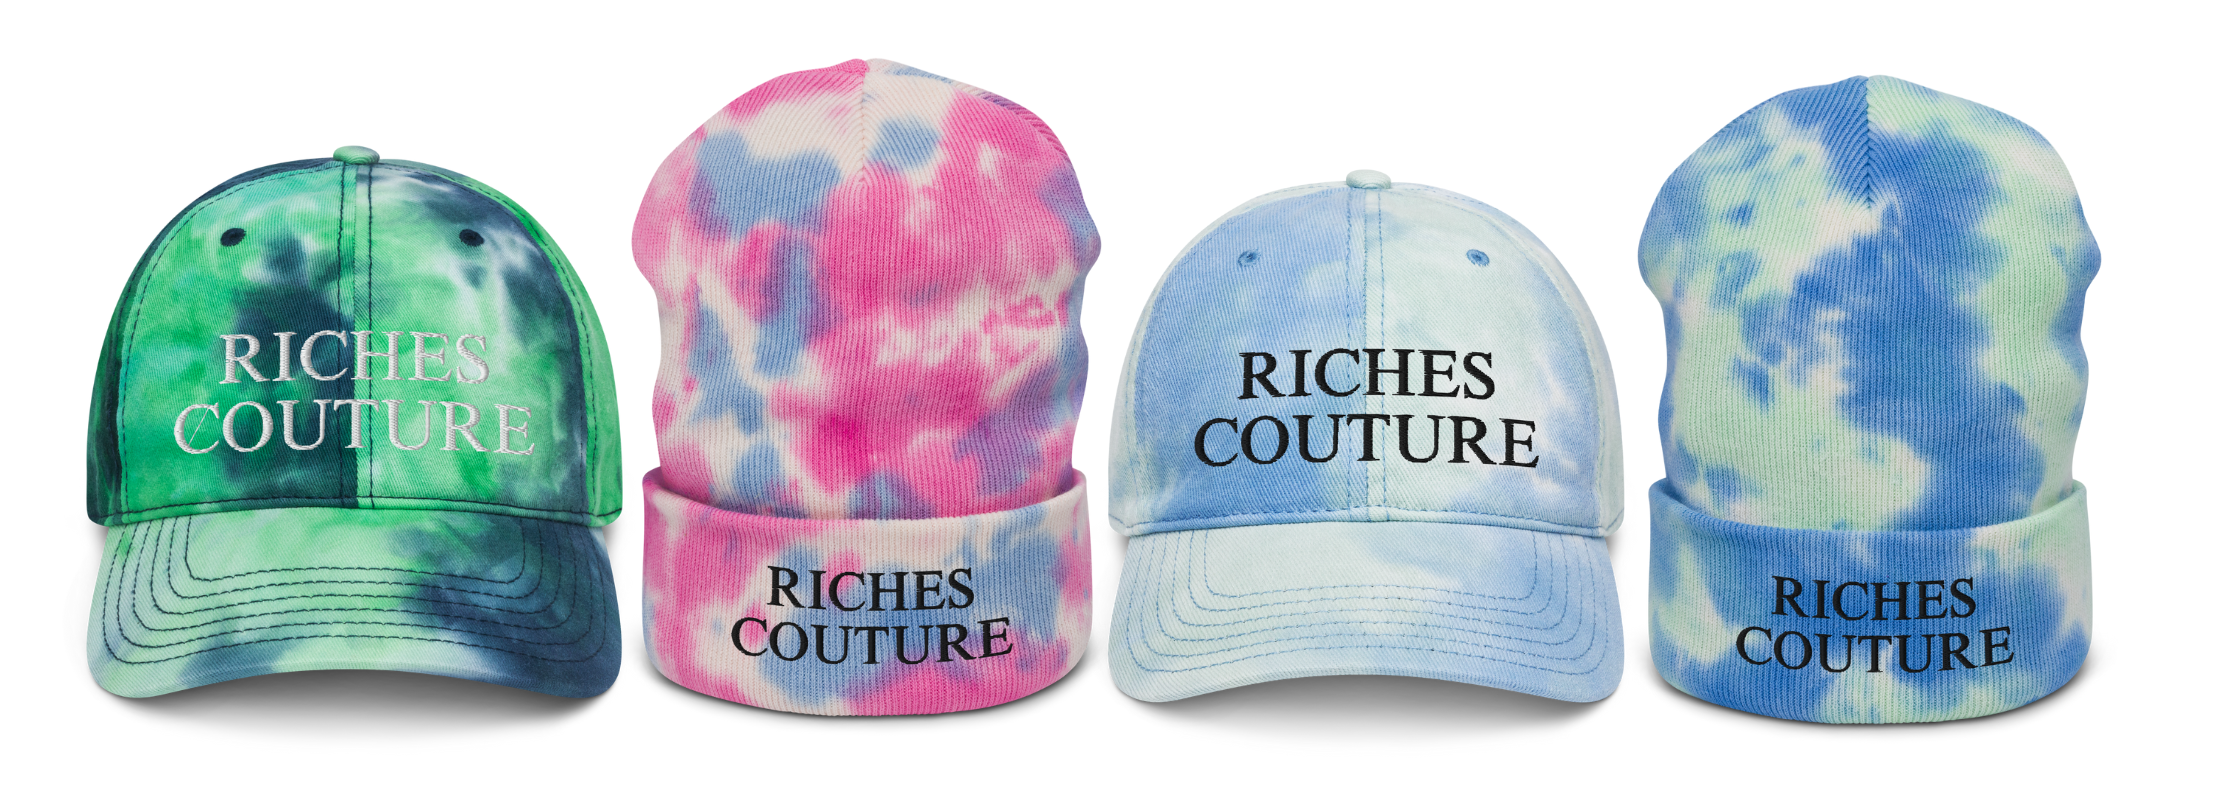 Riches Couture Tie Dye Hats Collection